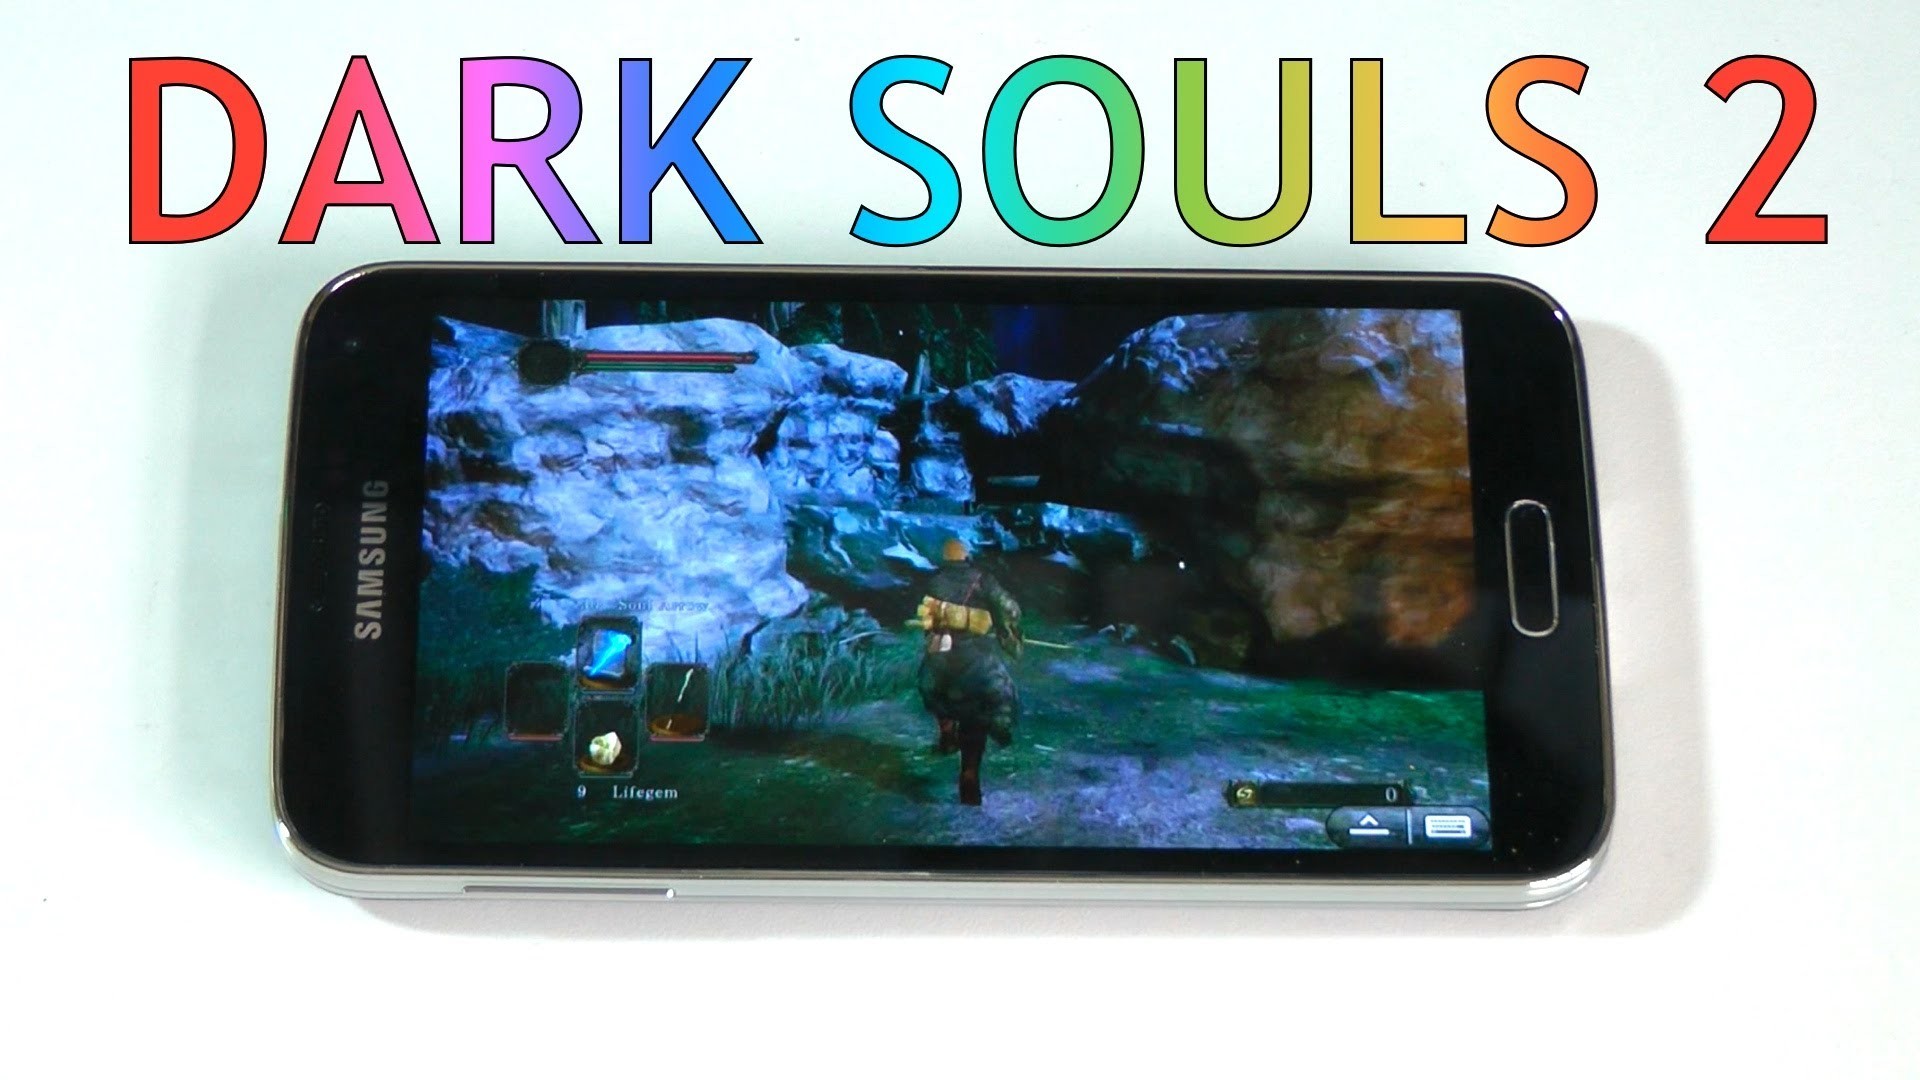 1920x1080 Dark Souls 2 on Android - Samsung Galaxy S5 Gaming!